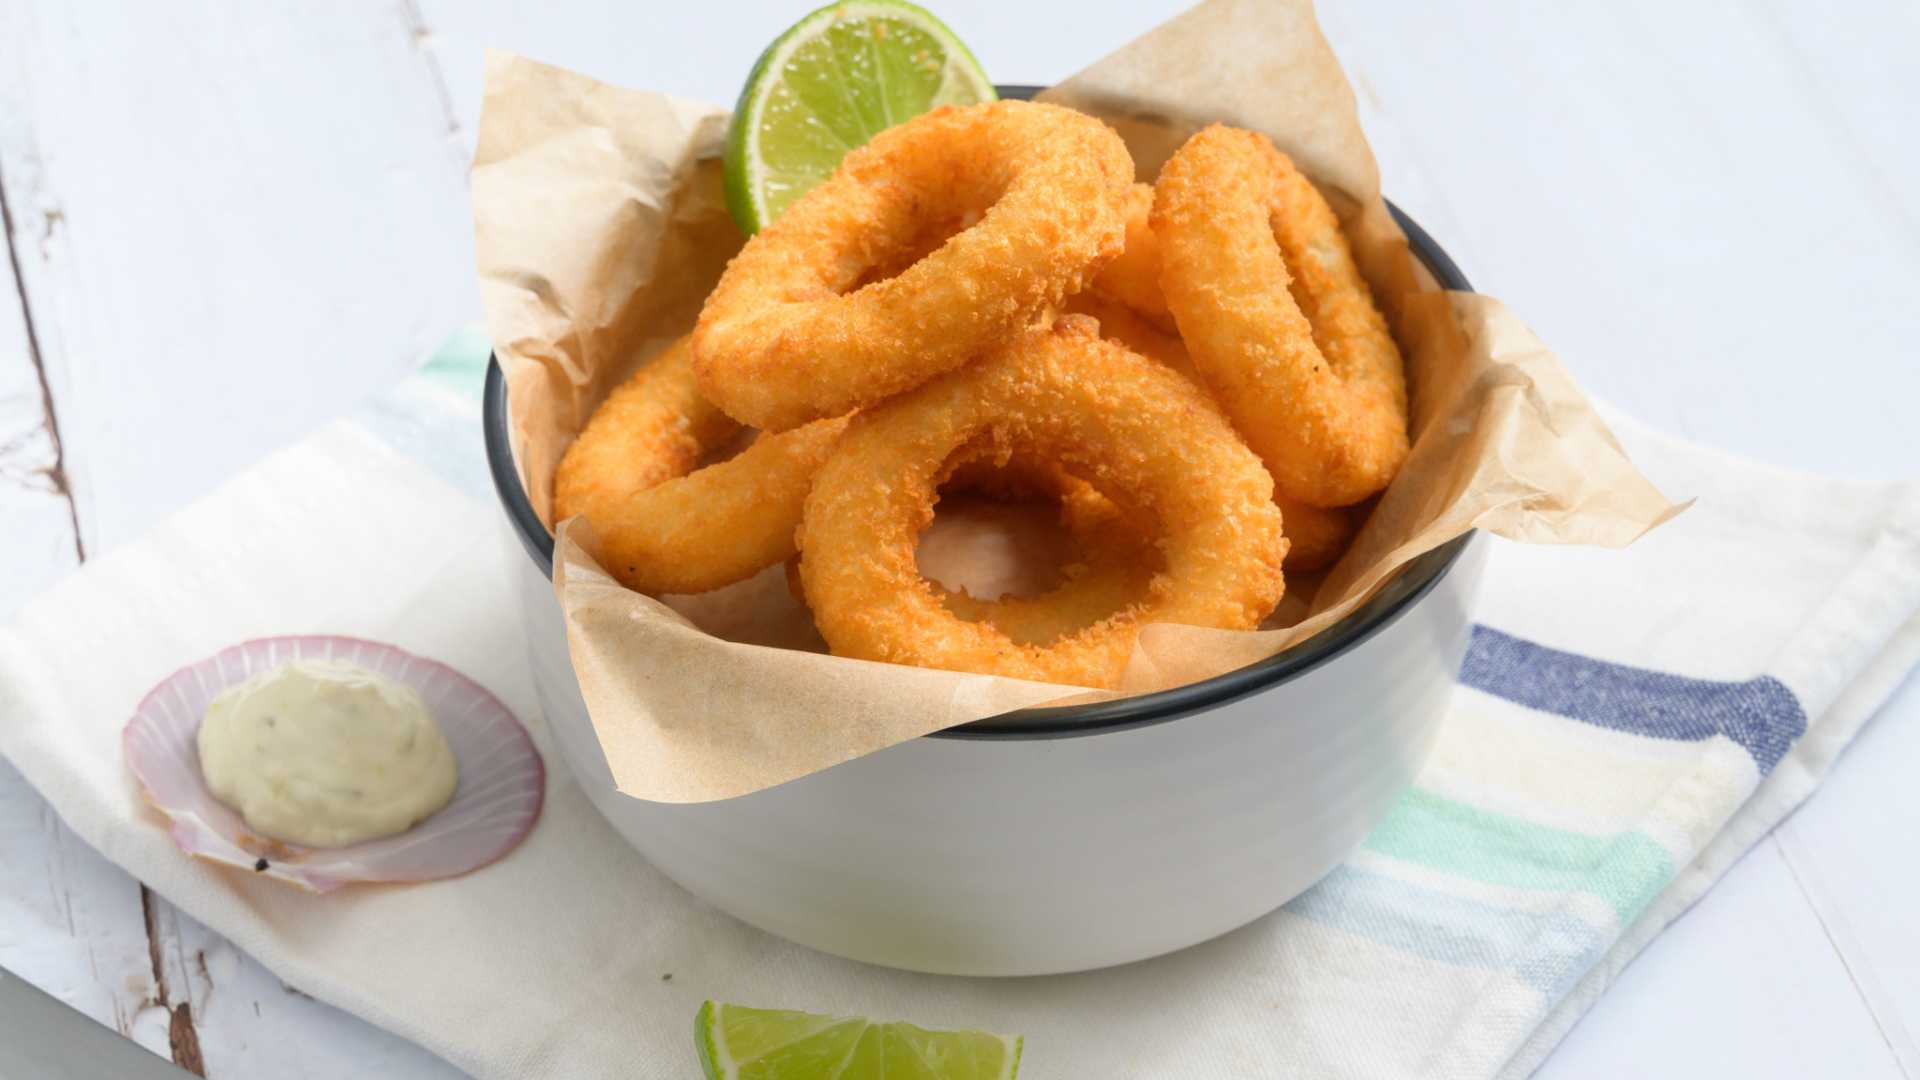 Shore Mariner Formed Crumbed Squid Rings